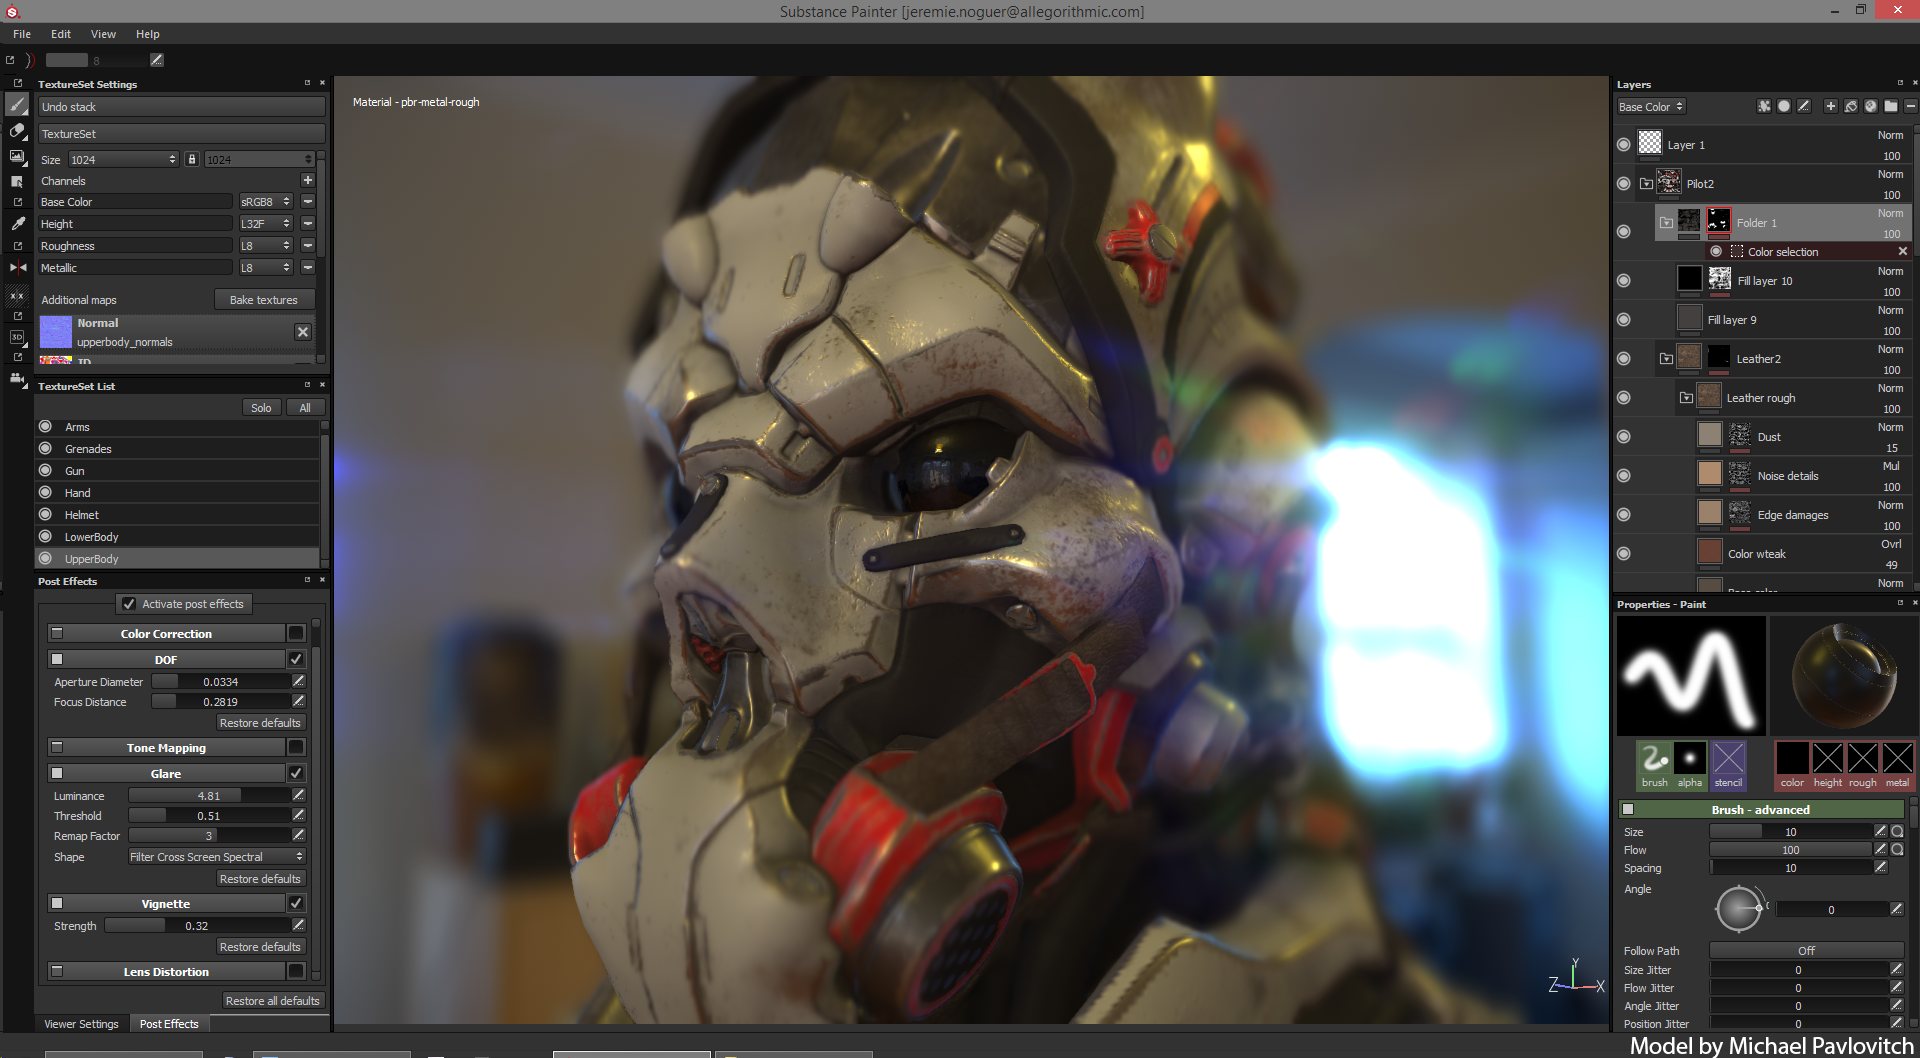 Substance Painter file extensions